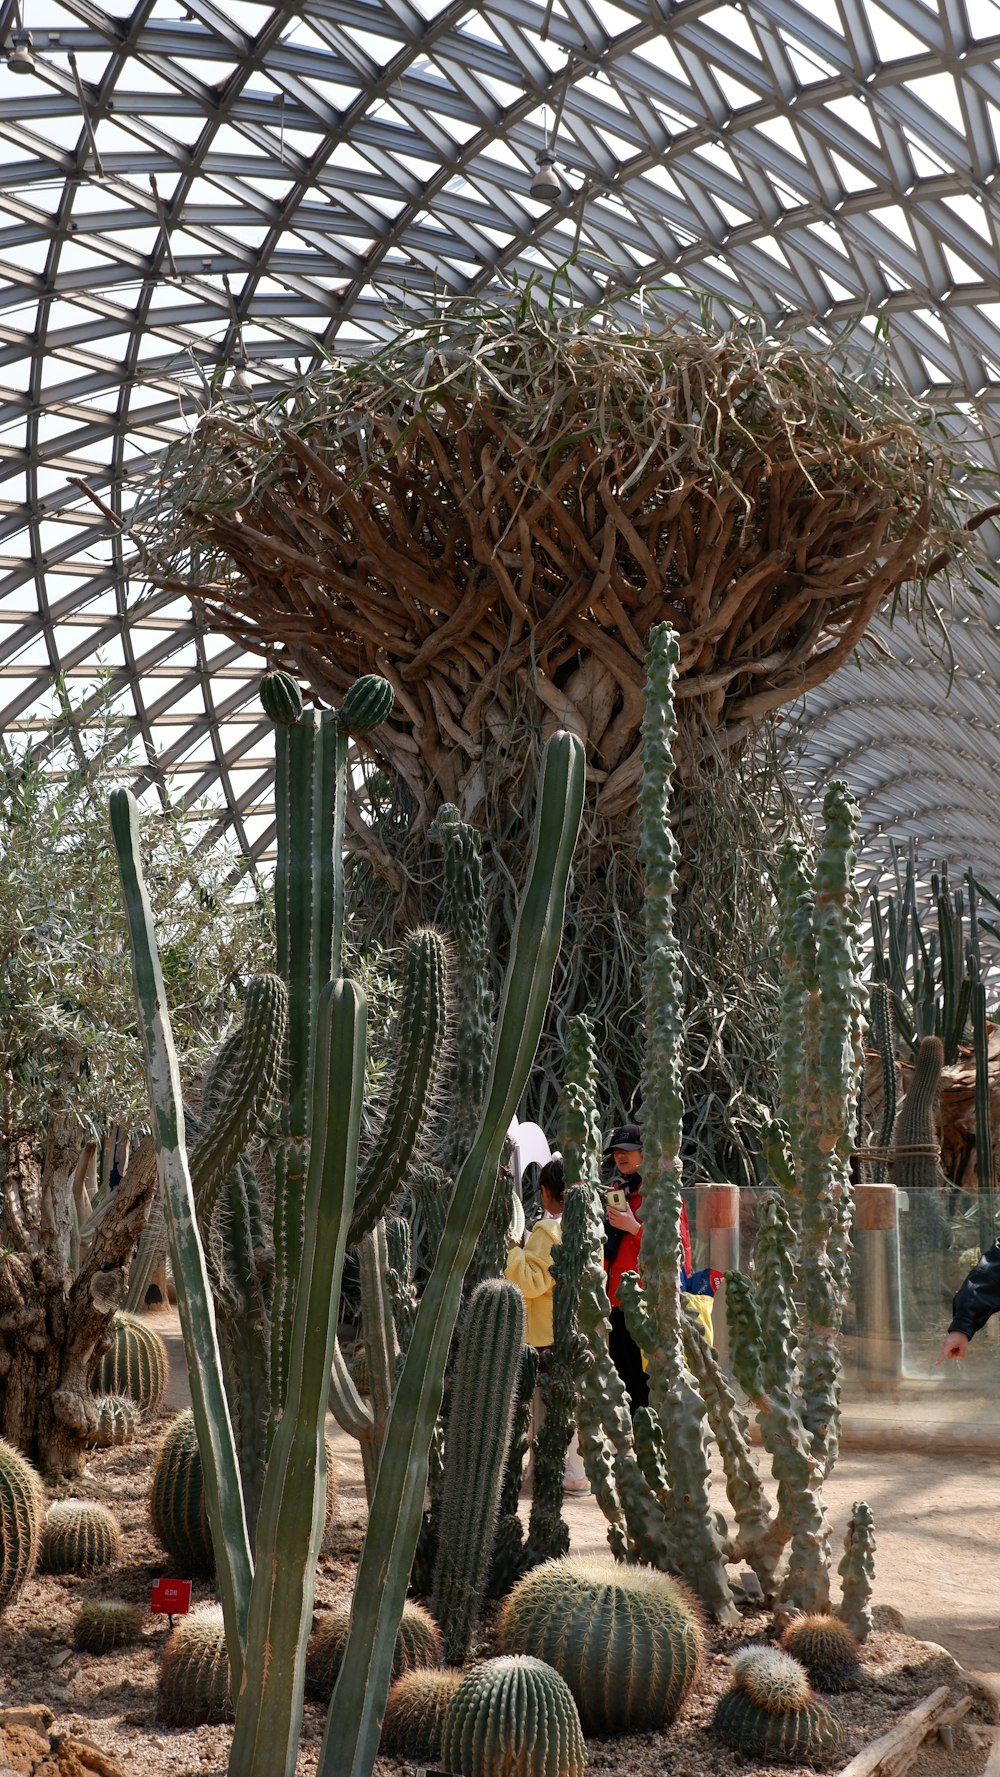 a group of cactus plants in a greenhouse